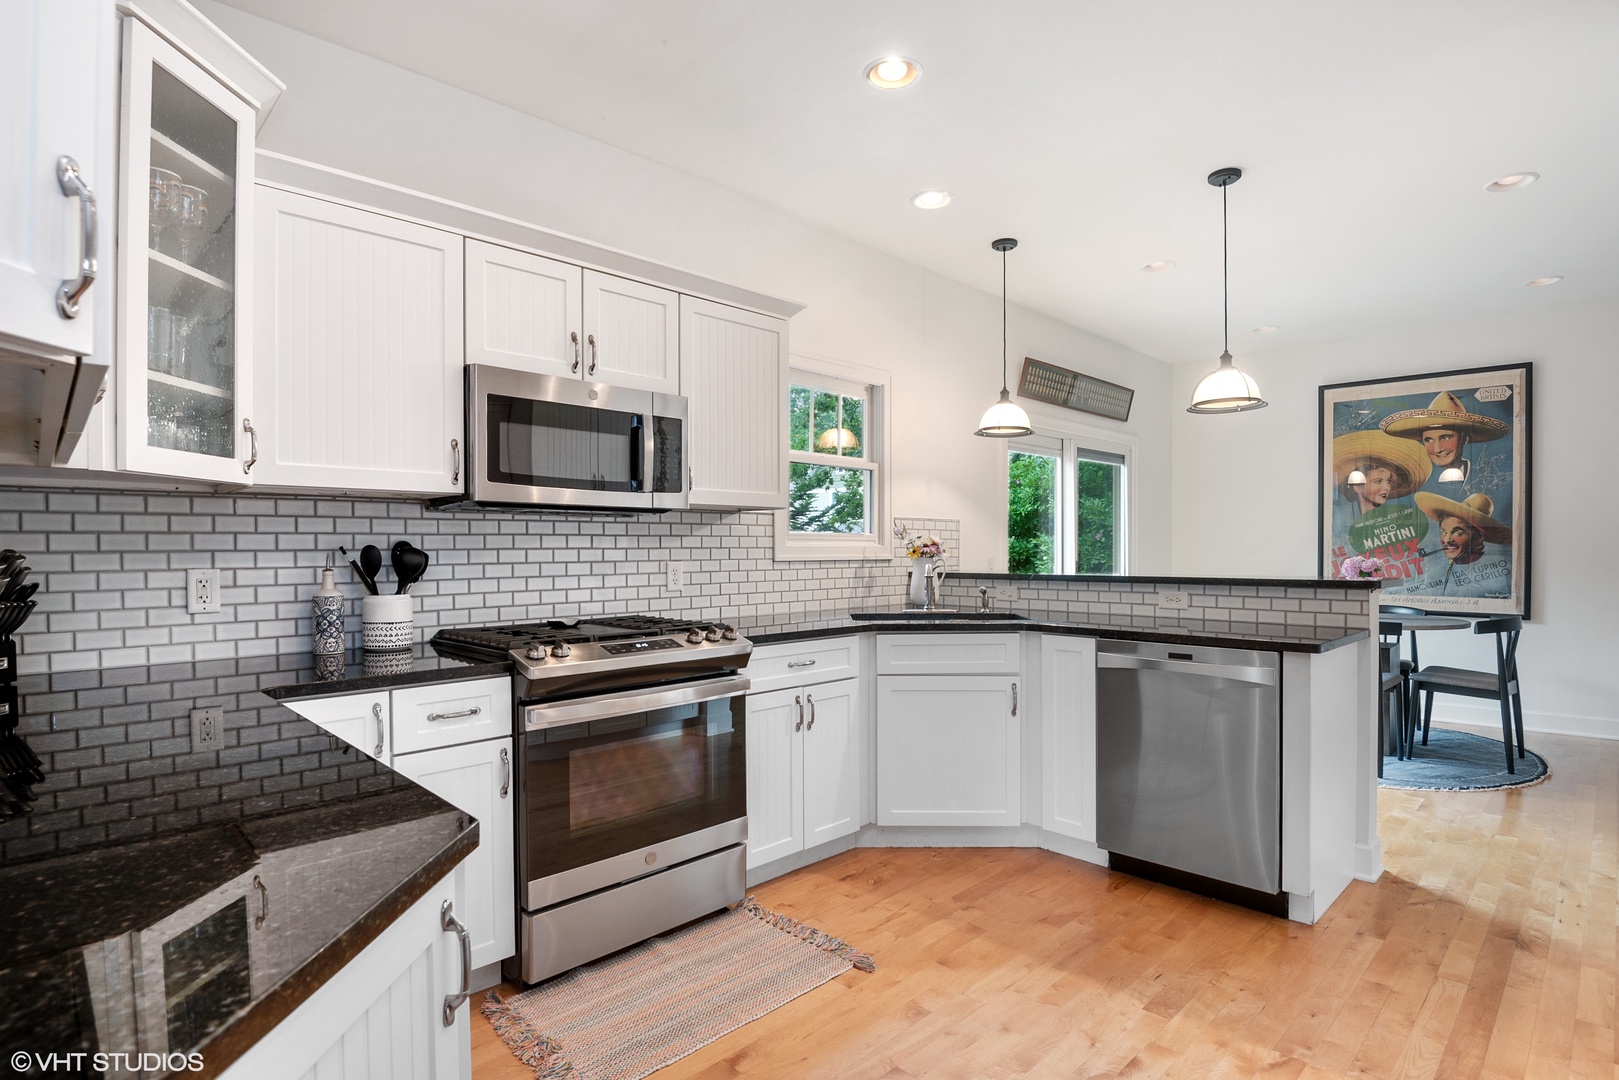 All-new high-end appliances accompanied by gorgeous marble countertops enhance the open-concept kitchen.